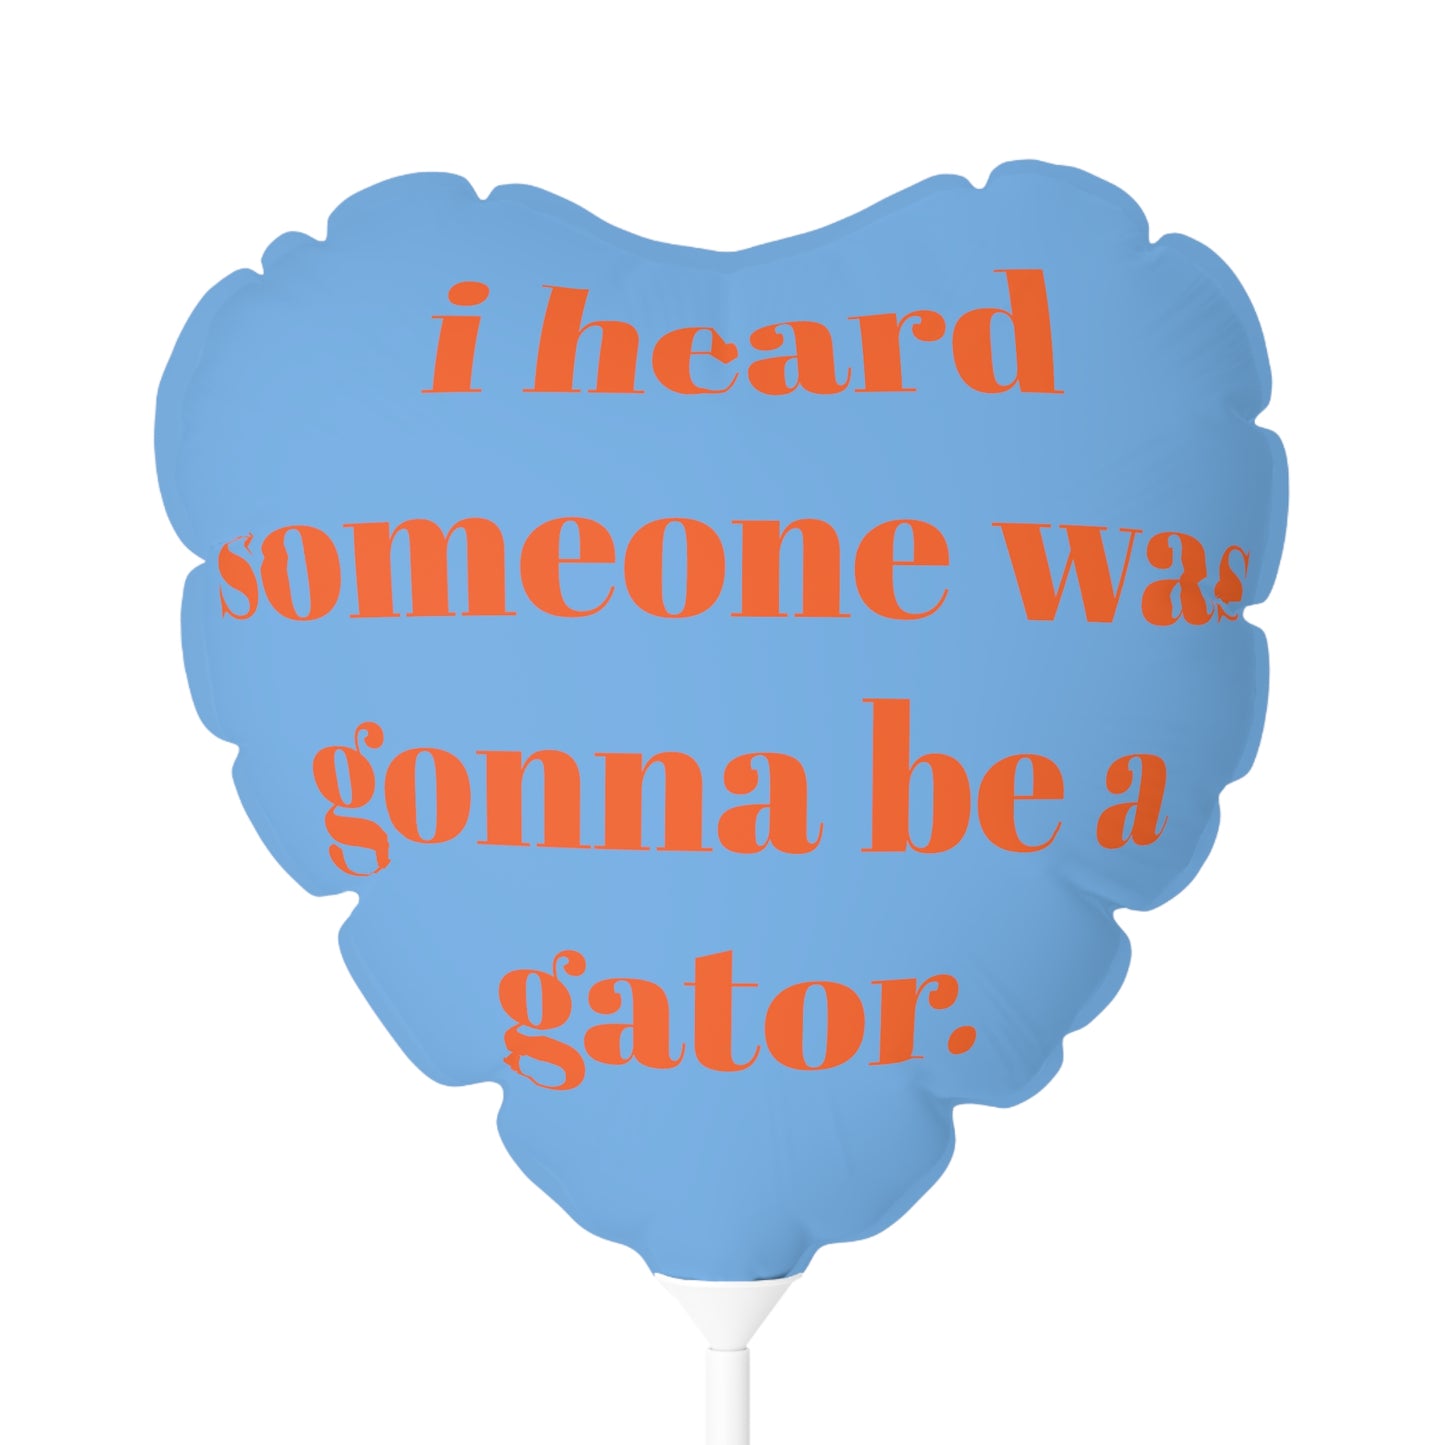 Always A Reason To Celebrate Collection- Gator Balloon (Round and Heart-shaped), 11"